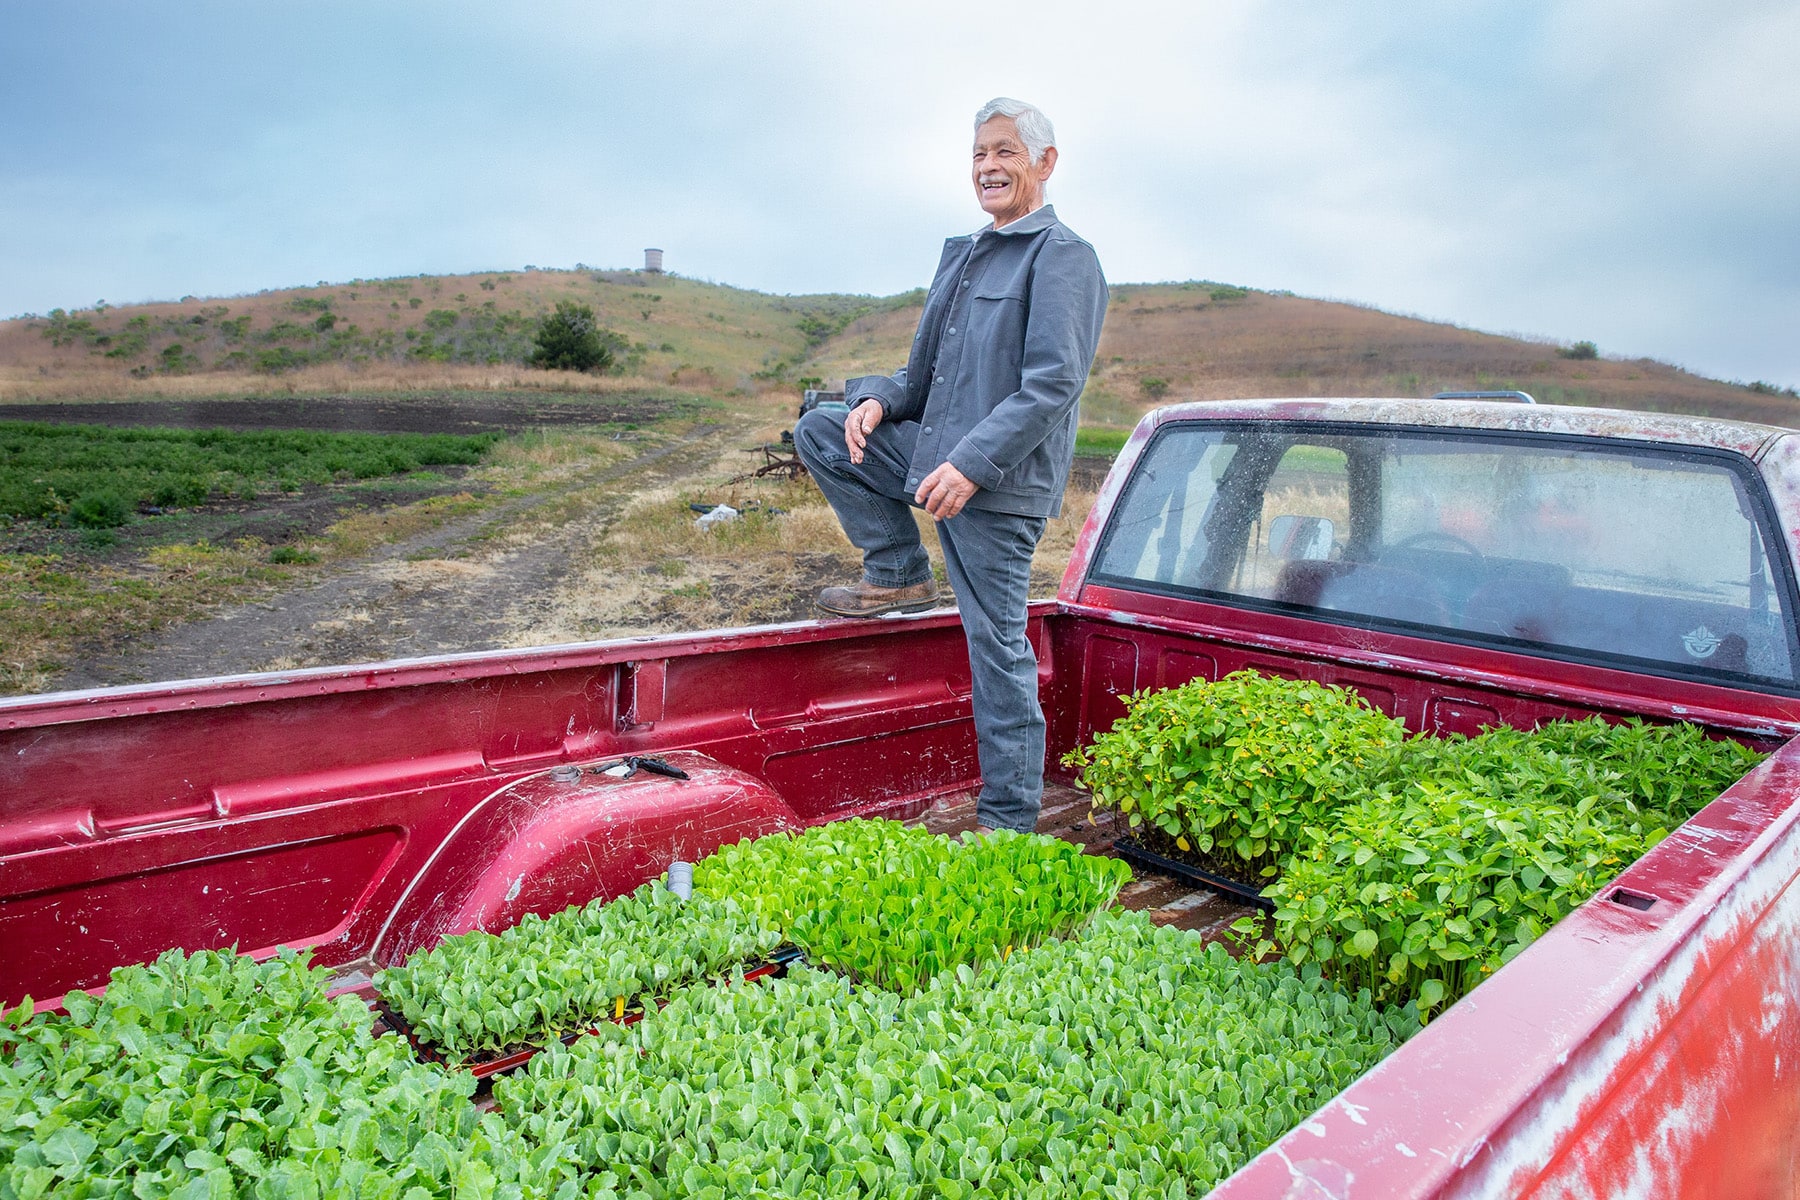 Mike Iñiguez of Ebby’s Organic Farm prepares to plant seedlings at his leased farm in Goleta. SBCFAN is helping Mike apply for funding and capital, access legal services, and find long-term sustainable farmland – and amplifying his story across multiple media channels to increase awareness of common challenges small farmers face.